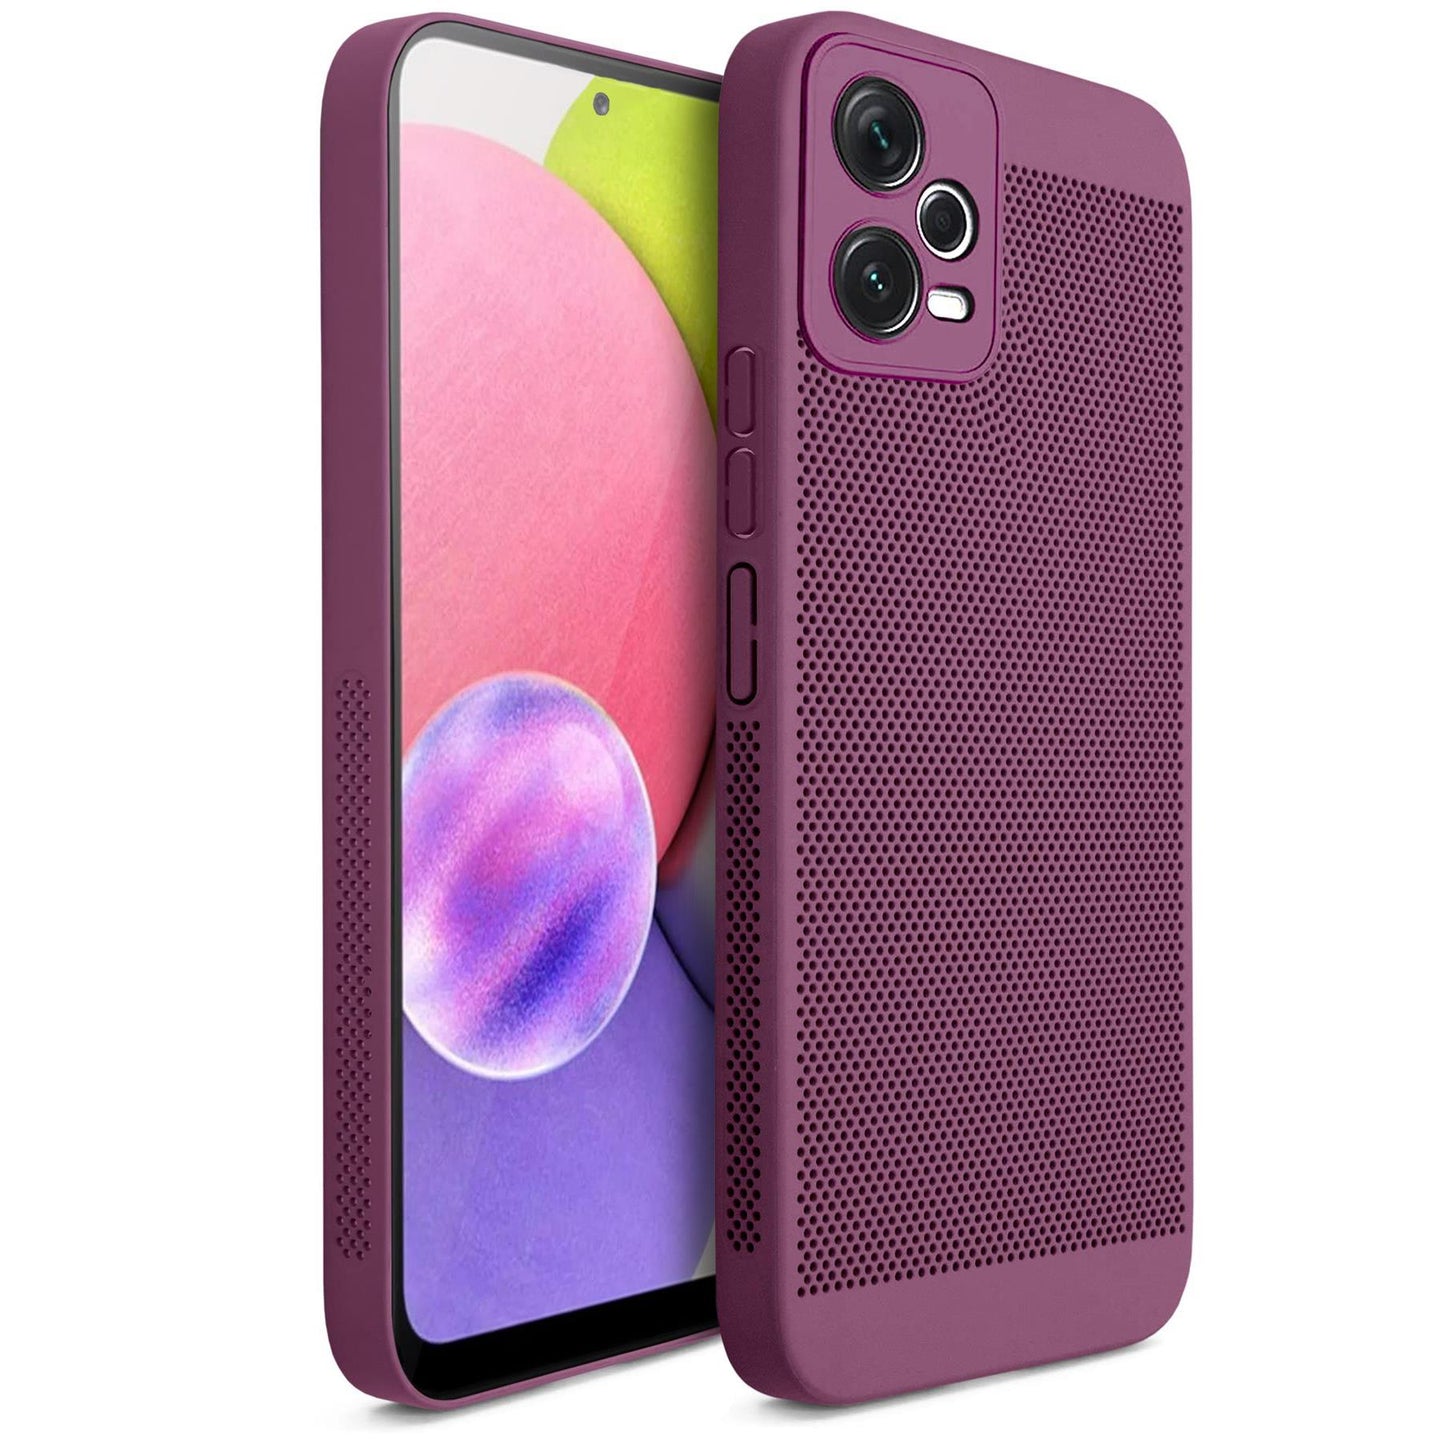 Moozy VentiGuard Phone Case for Xiaomi Redmi Note 12 Pro 5G, Purple - Breathable Cover with Perforated Pattern for Air Circulation, Ventilation, Anti-Overheating Phone Case